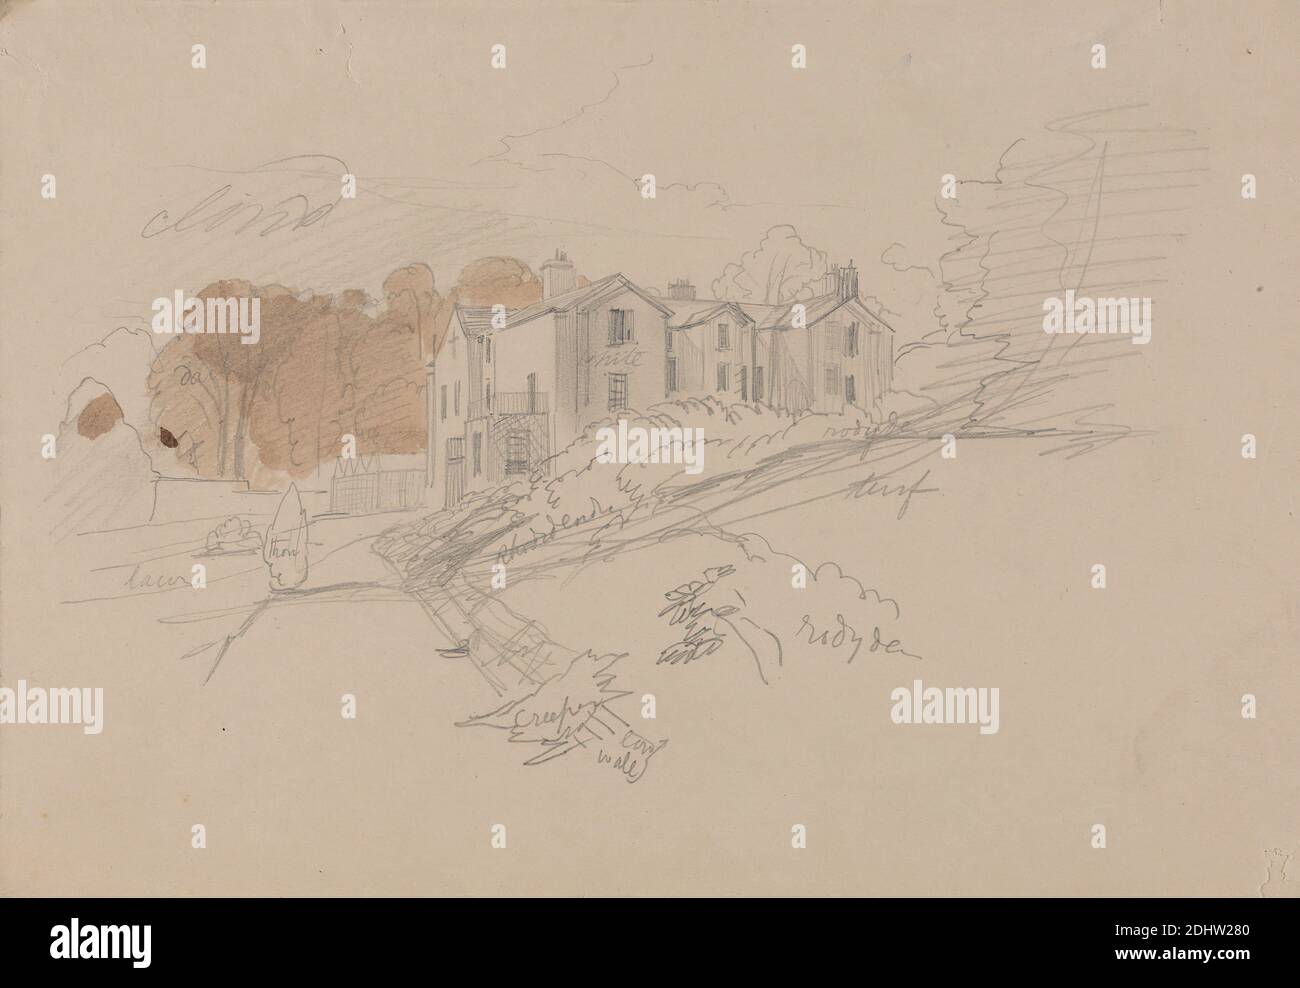 A Country House, Edward Lear, 1812–1888, British, ca. 1834, Graphite and brown wash on moderately thick,slightly textured, beige wove paper, Sheet: 6 7/8 x 10 inches (17.5 x 25.4 cm), architectural subject, bushes, chimneys (architectural elements), country house, road, windows Stock Photo